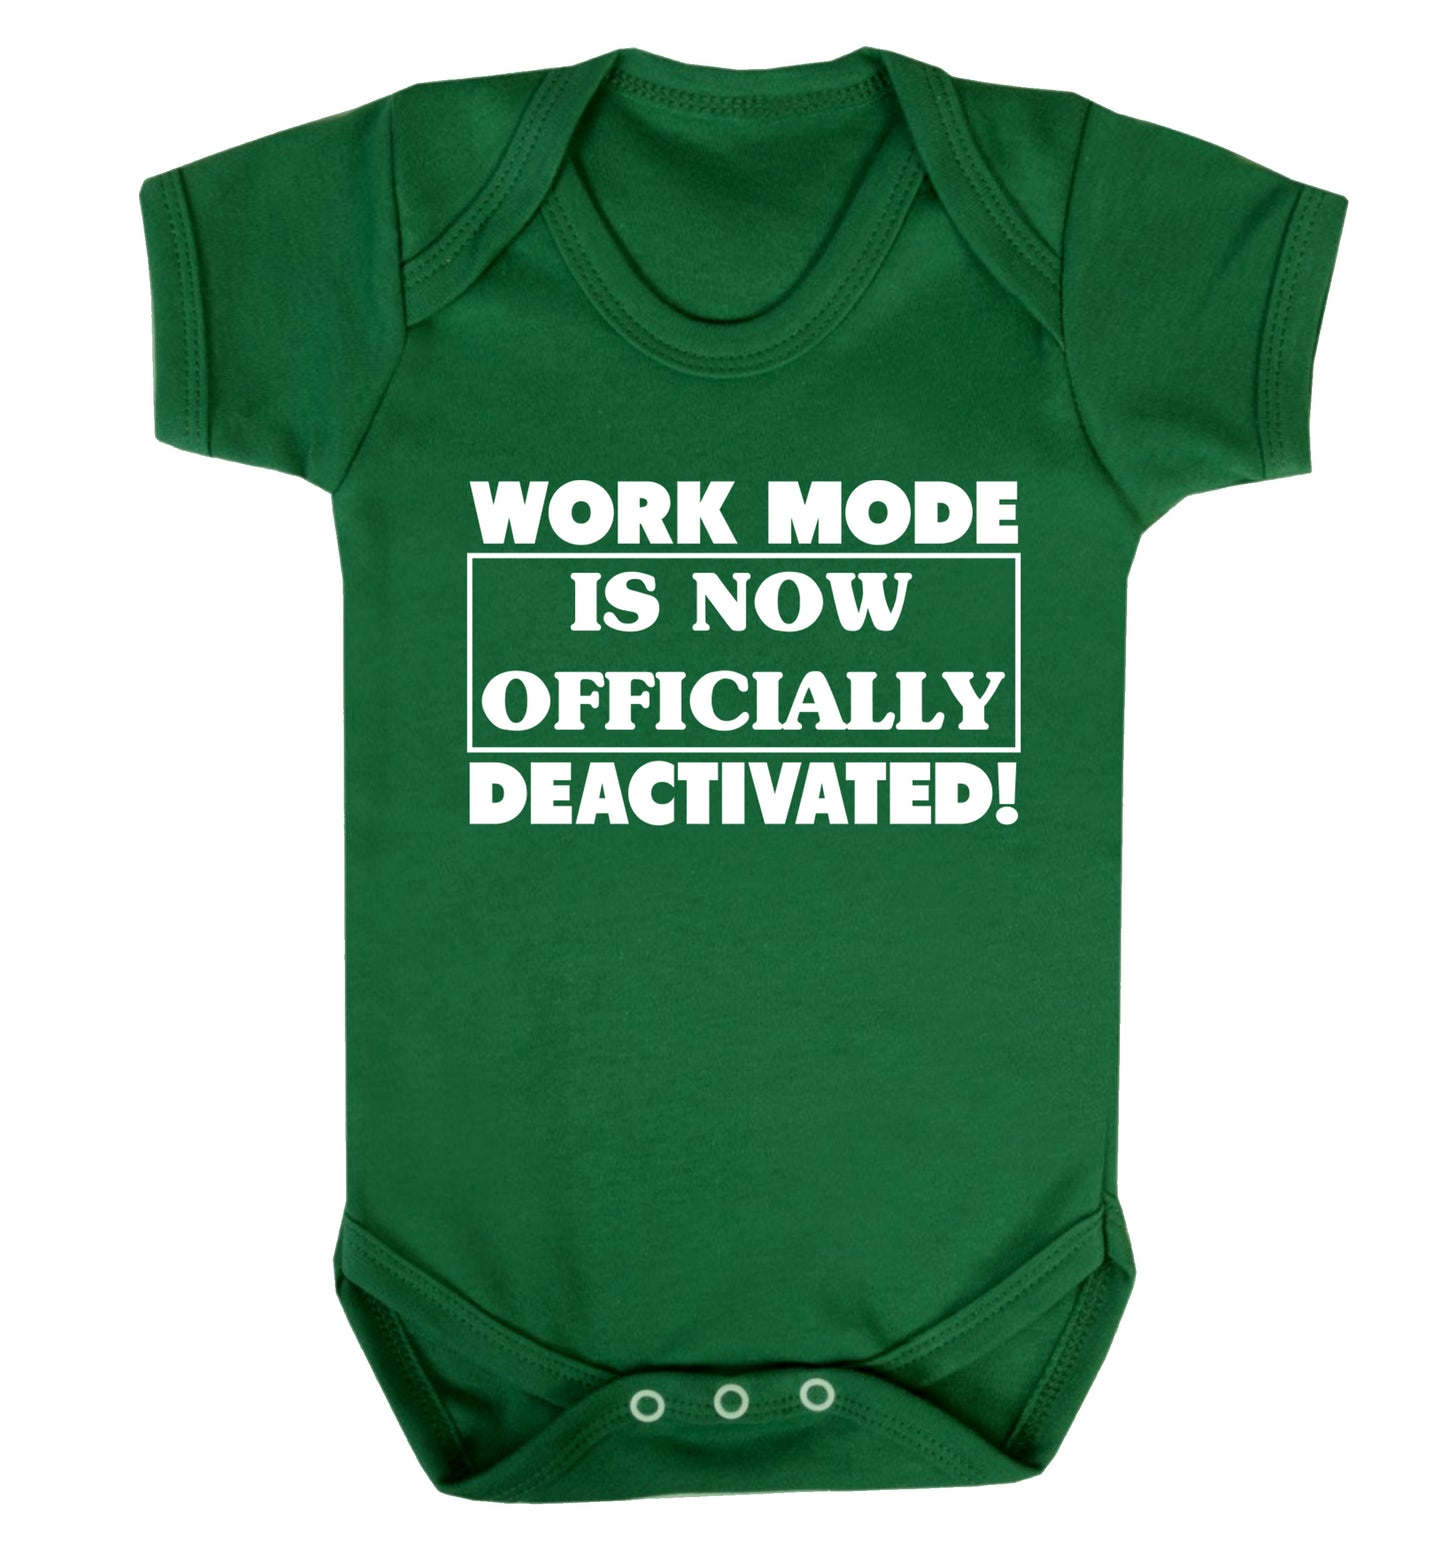 Work mode is now officially deactivated Baby Vest green 18-24 months